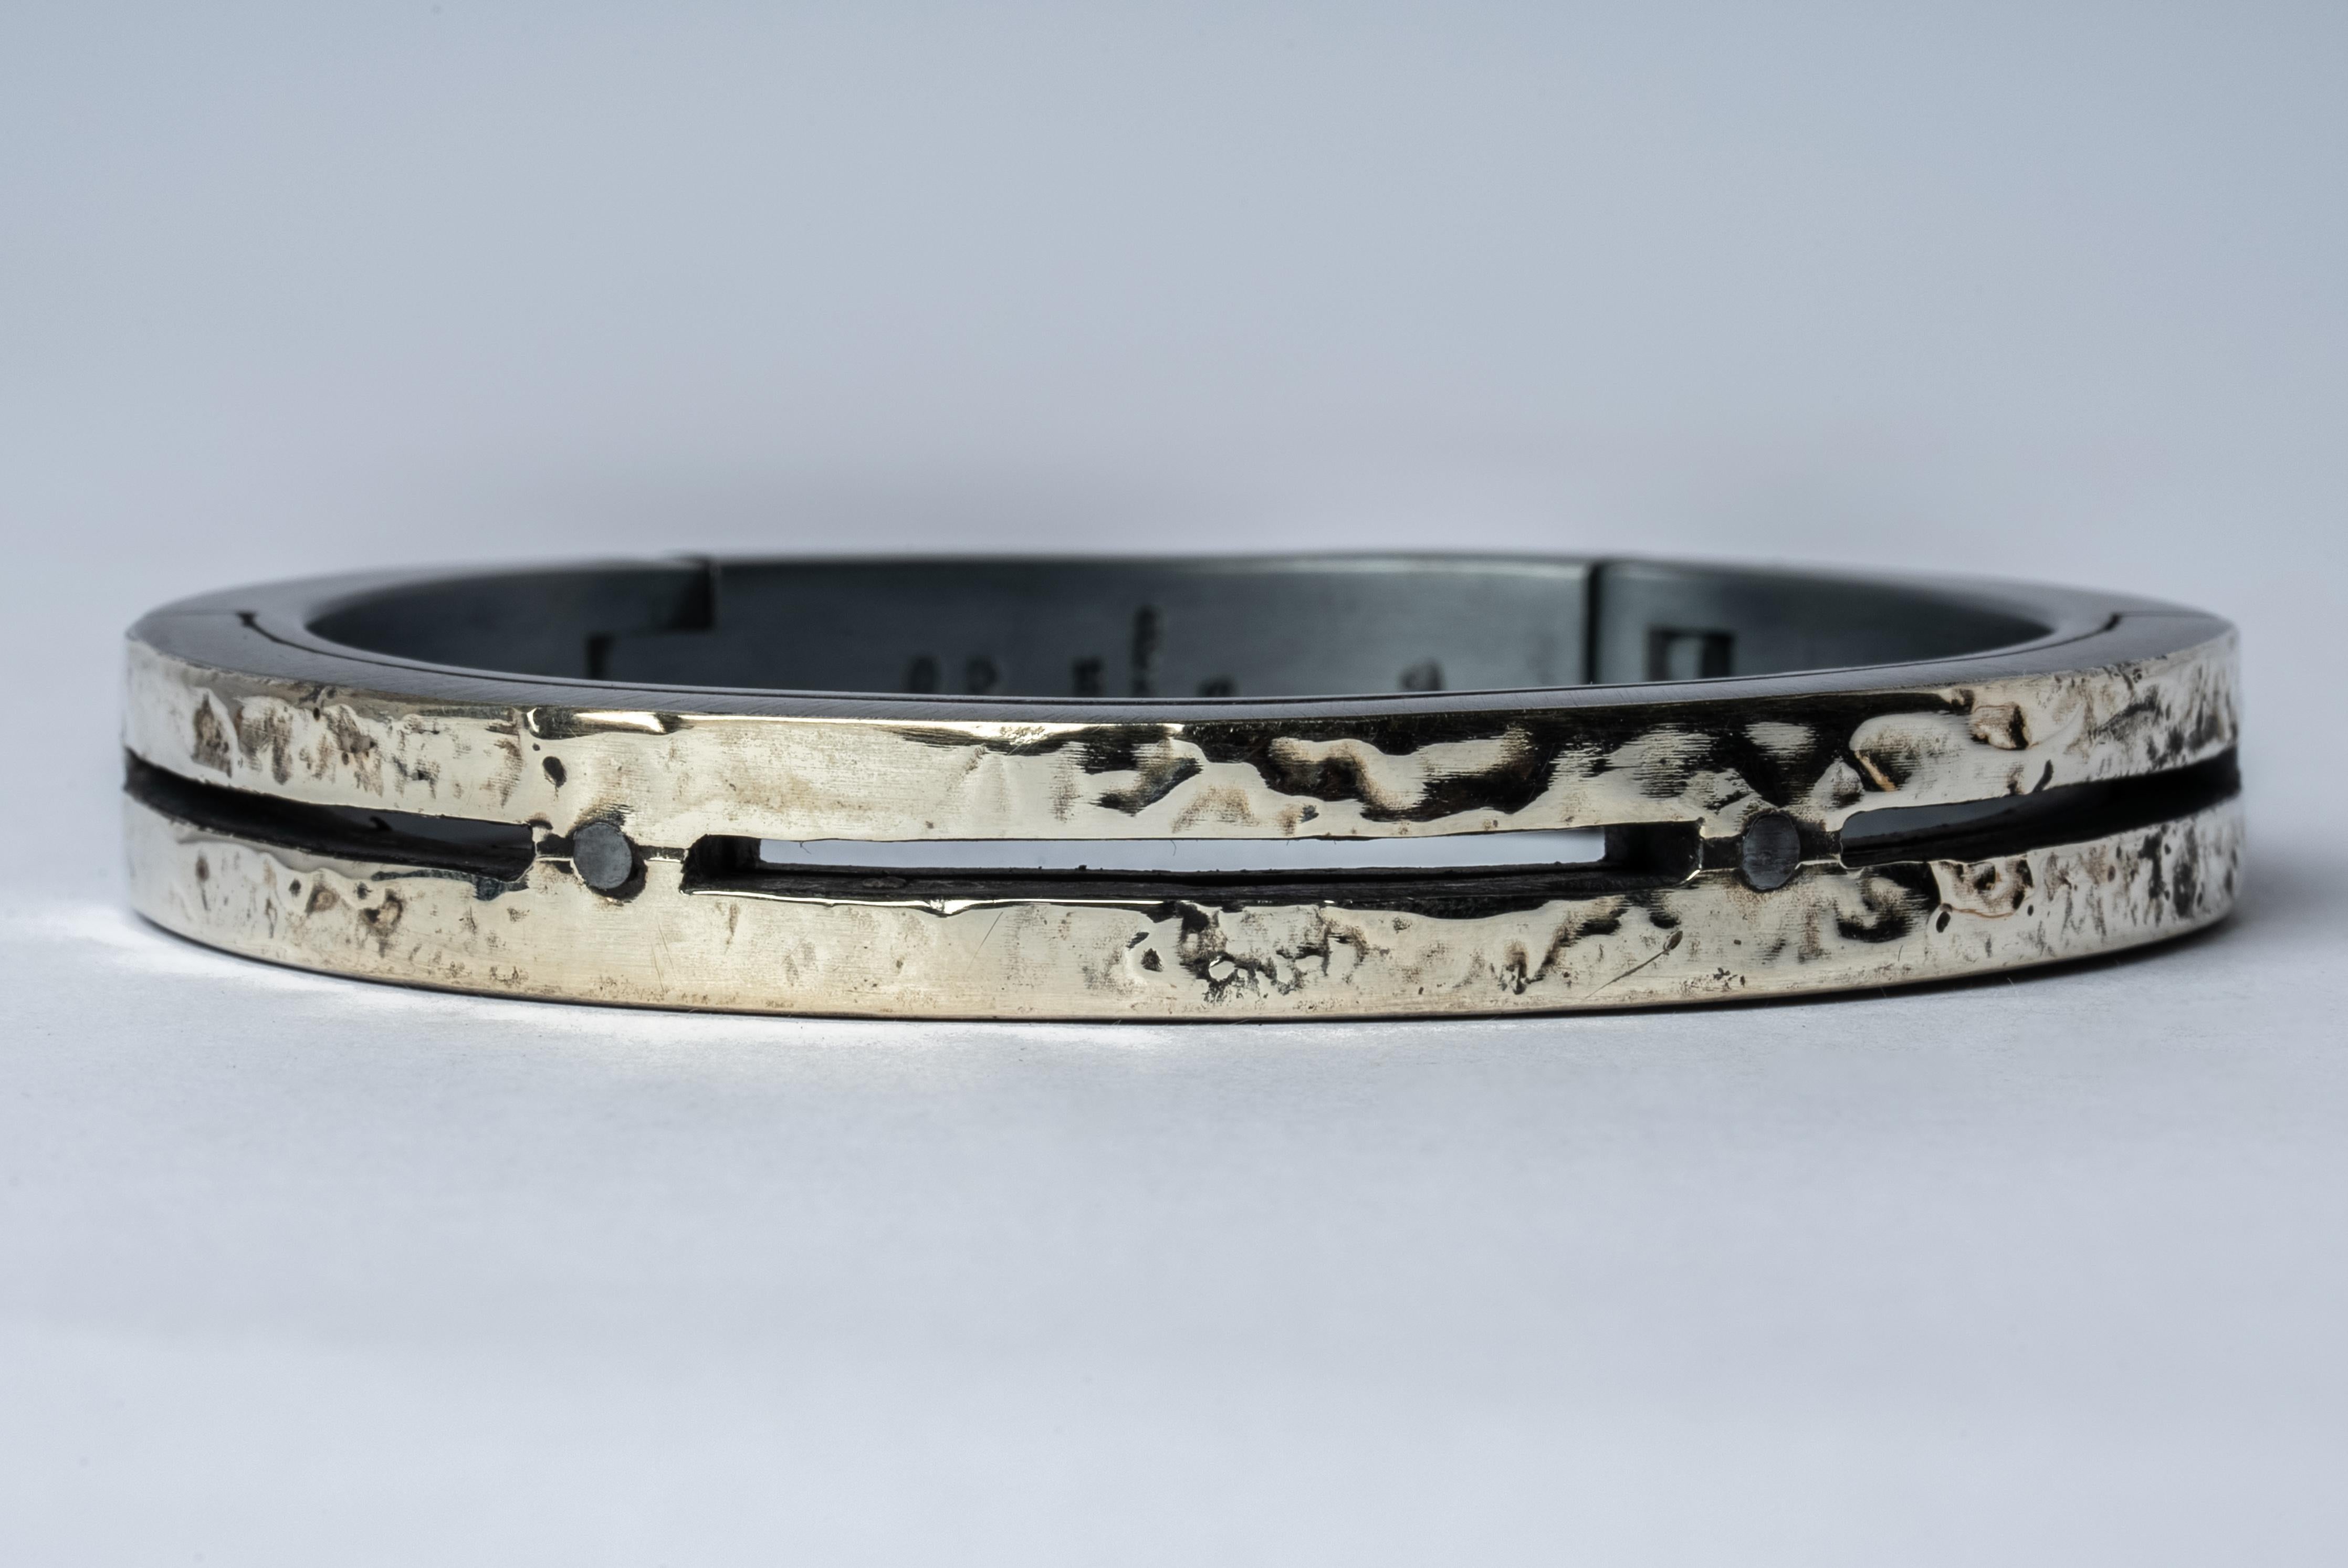 Sistema bracelet in sterling silver and 10k solid white gold layer fused on the surface. The 